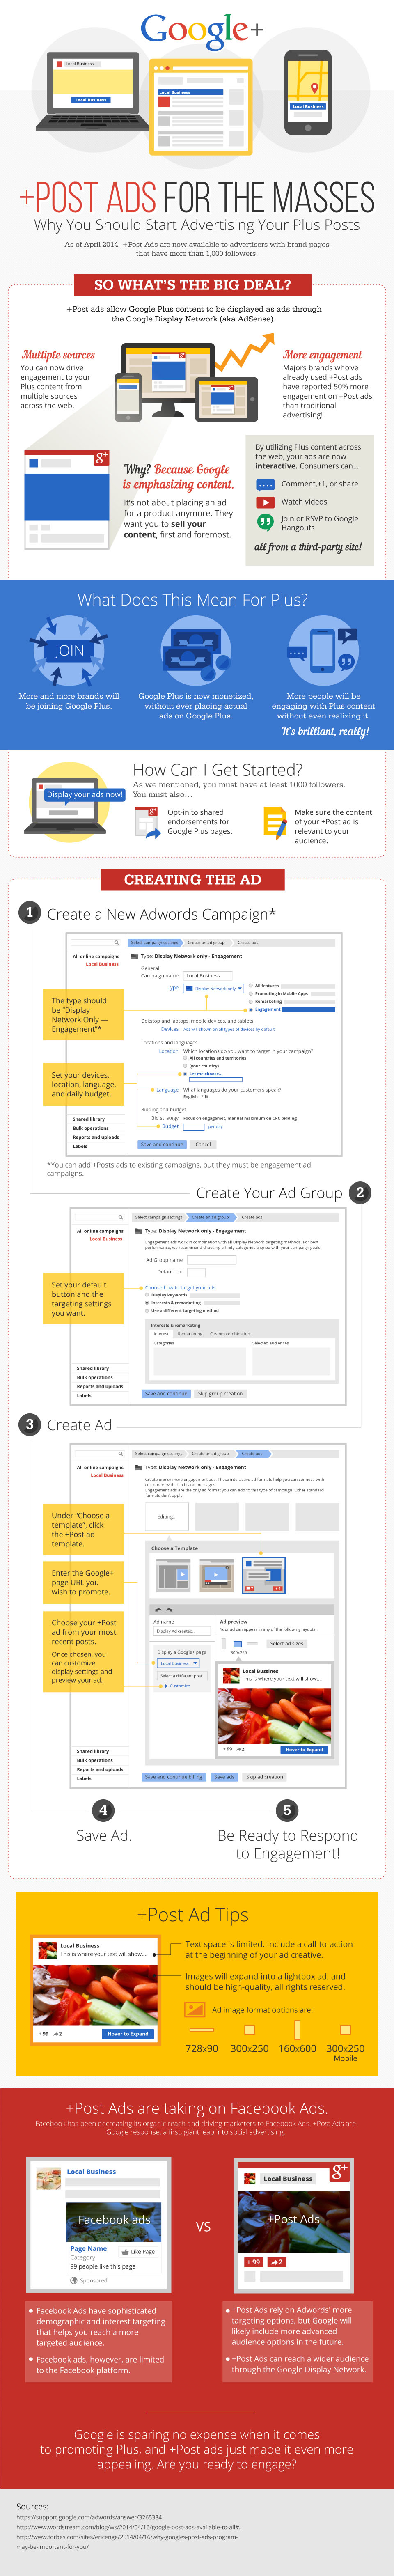 Boost Your Content With Google+ Post Ads